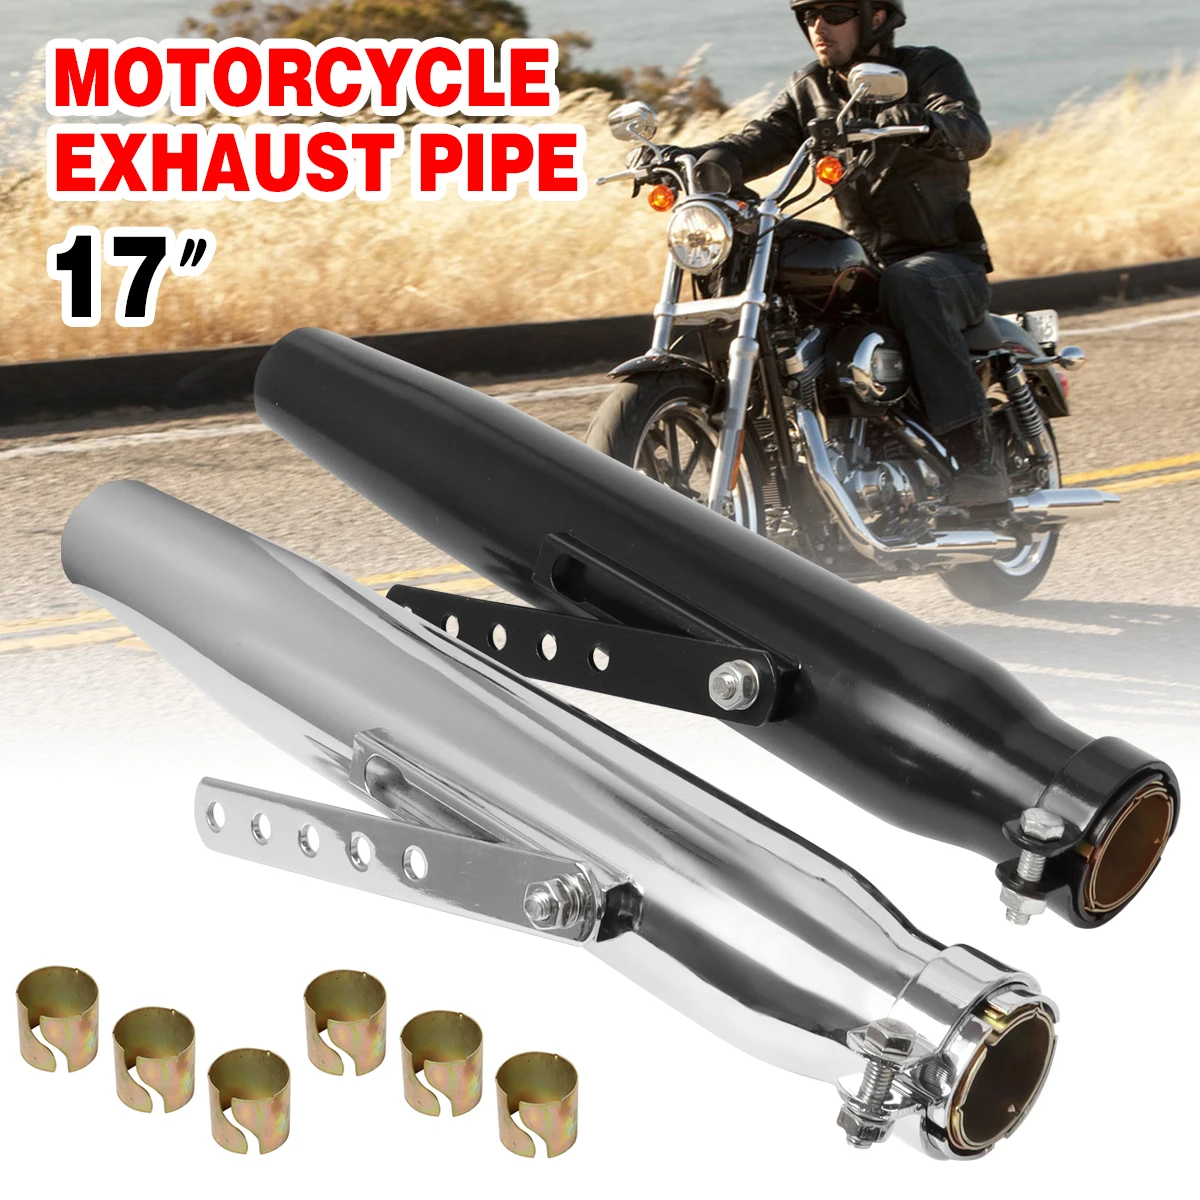 

Universal 17'' Motorcycle Exhaust Muffler Pipe Tip Retro Vintage Rear Pipe Tube Exhause Silencer For Suzuki/Bobbers Cafe Racer